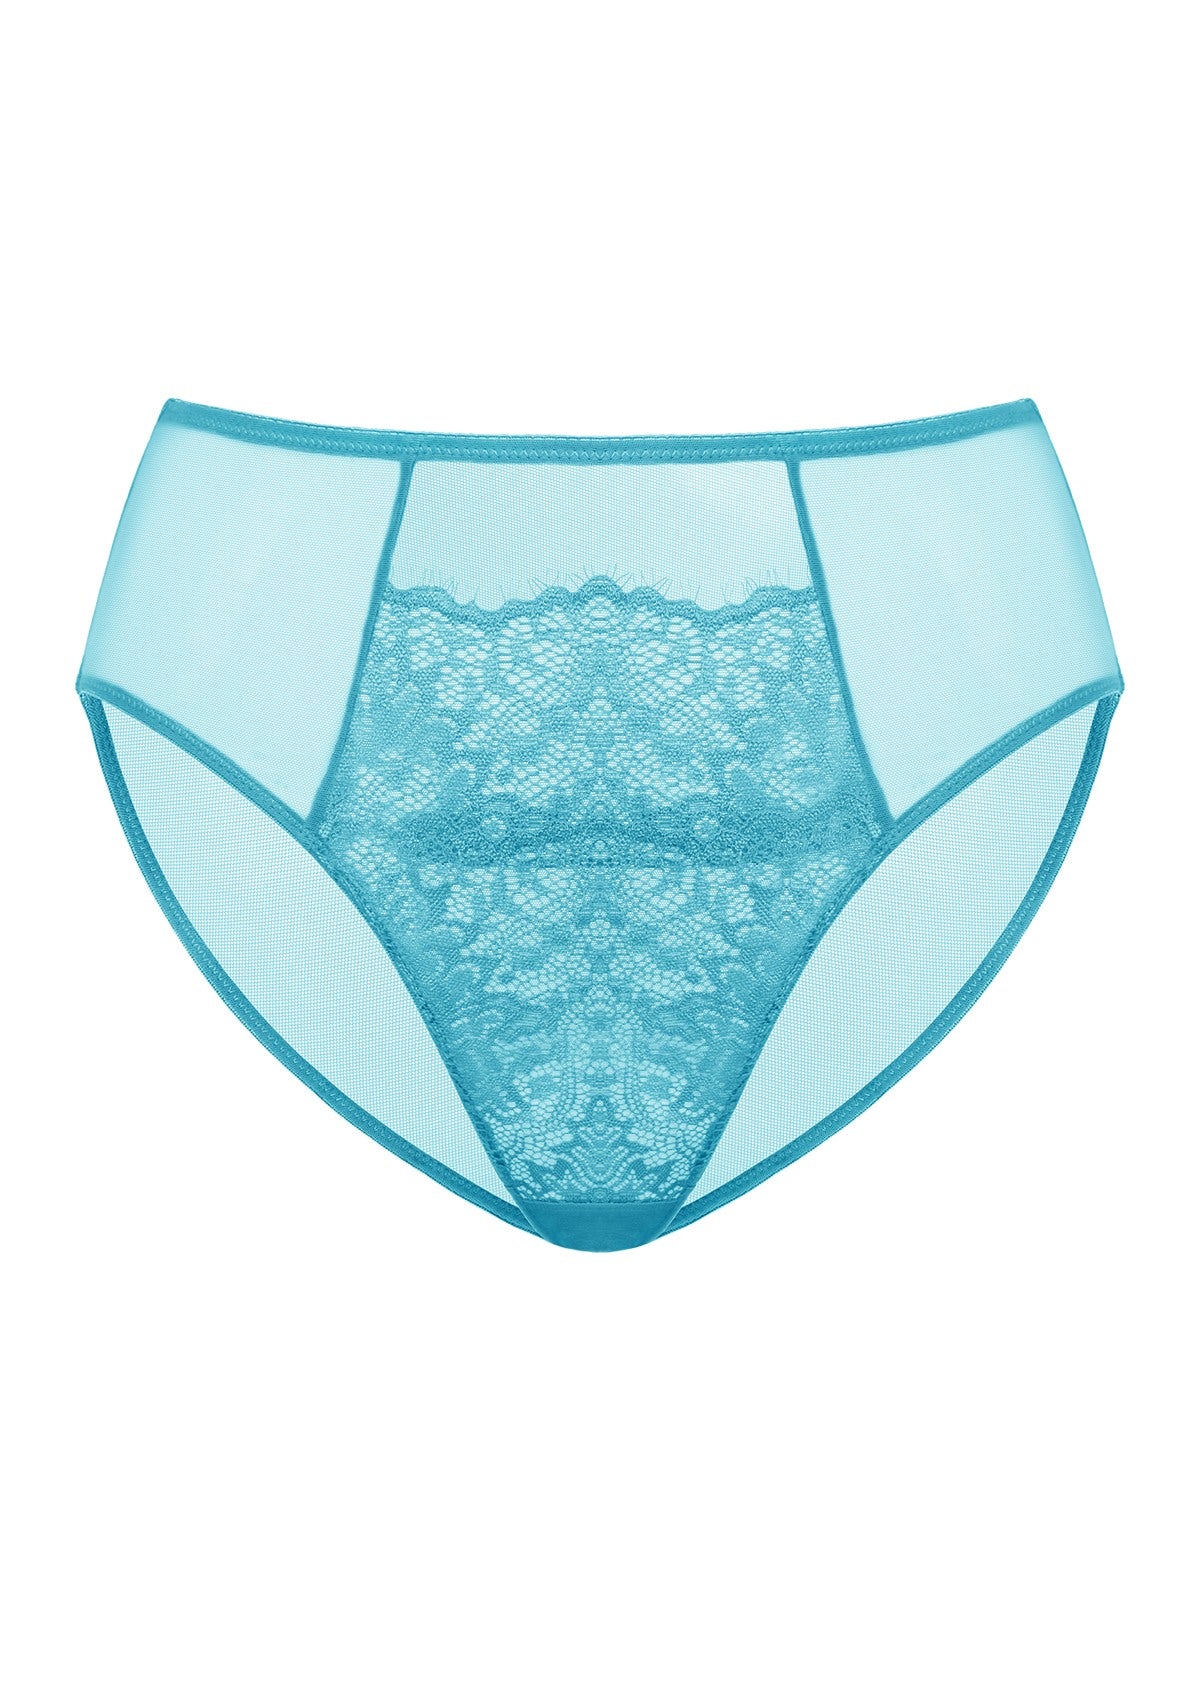 HSIA Spring Romance High-Rise Floral Lacy Panty-Comfort In Style - L / Horizon Blue